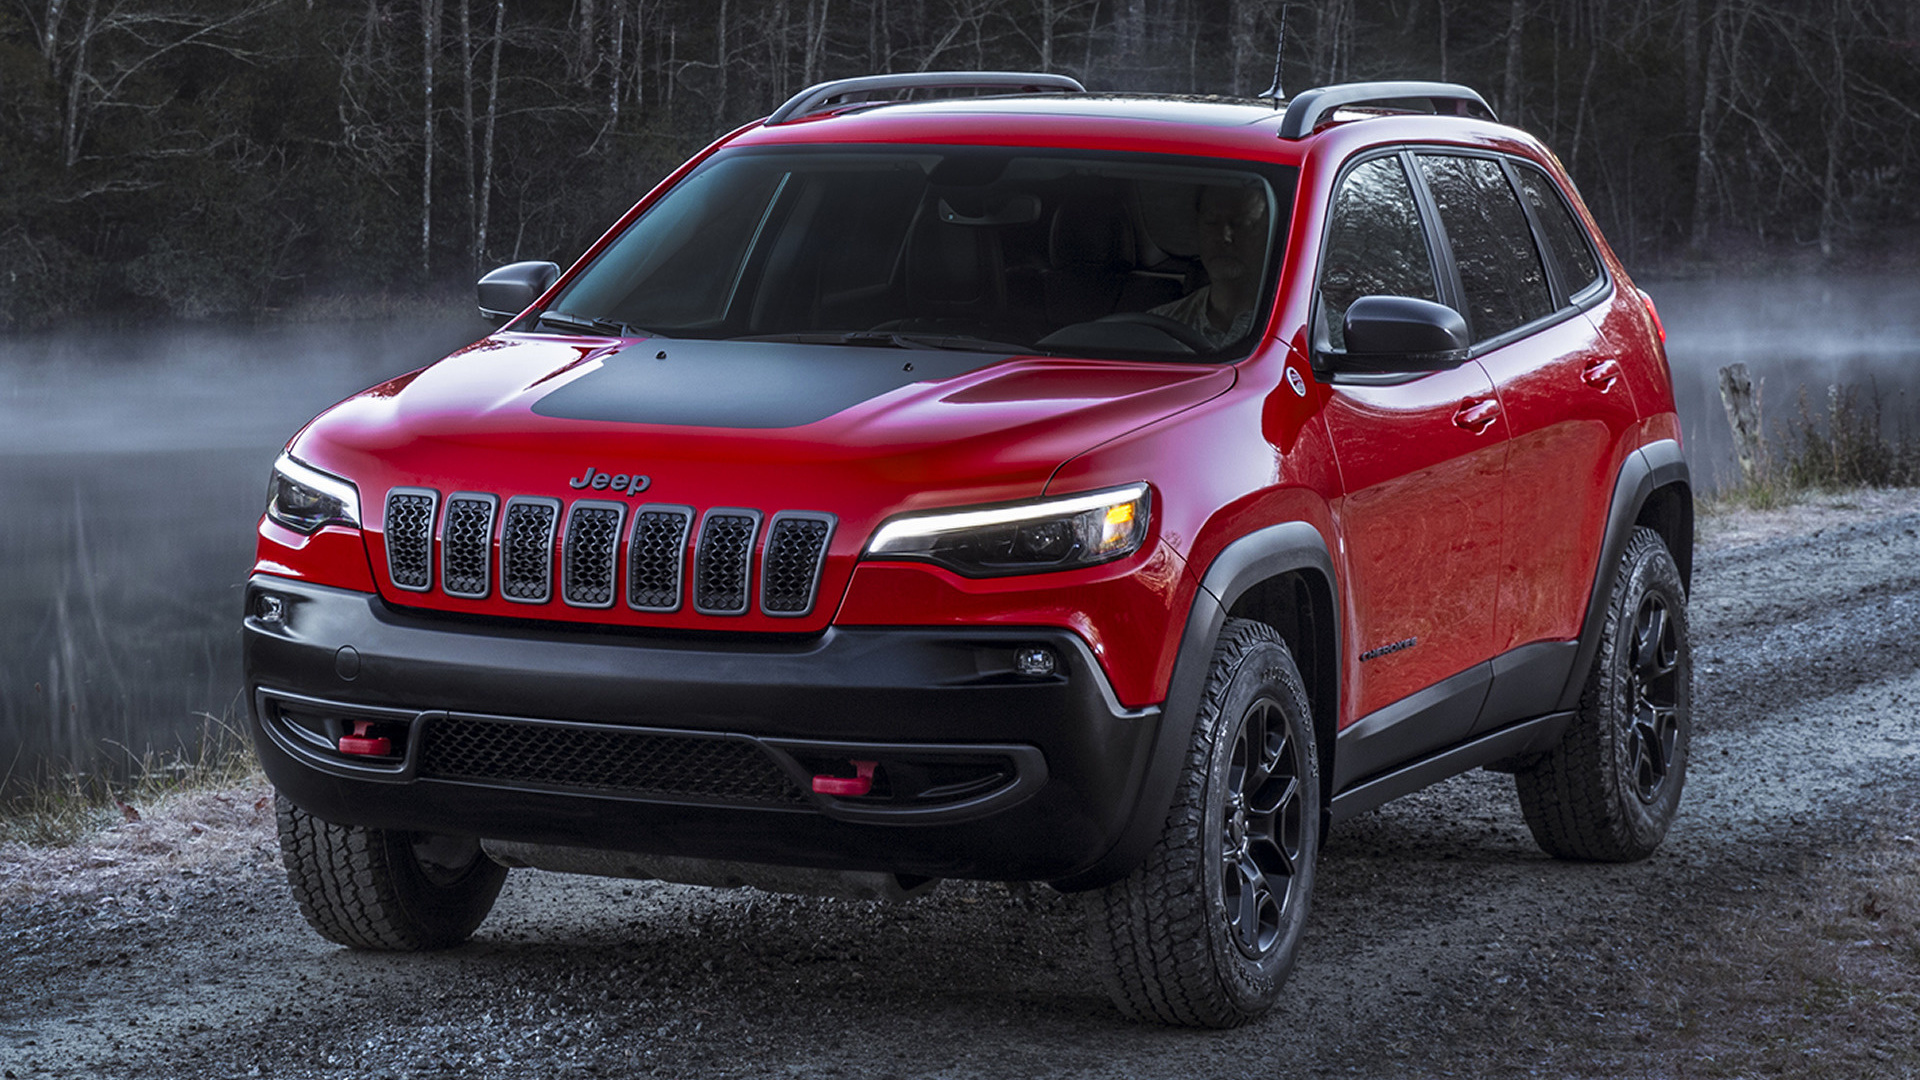 2018 Jeep Cherokee Trailhawk - Wallpapers and HD Images | Car Pixel